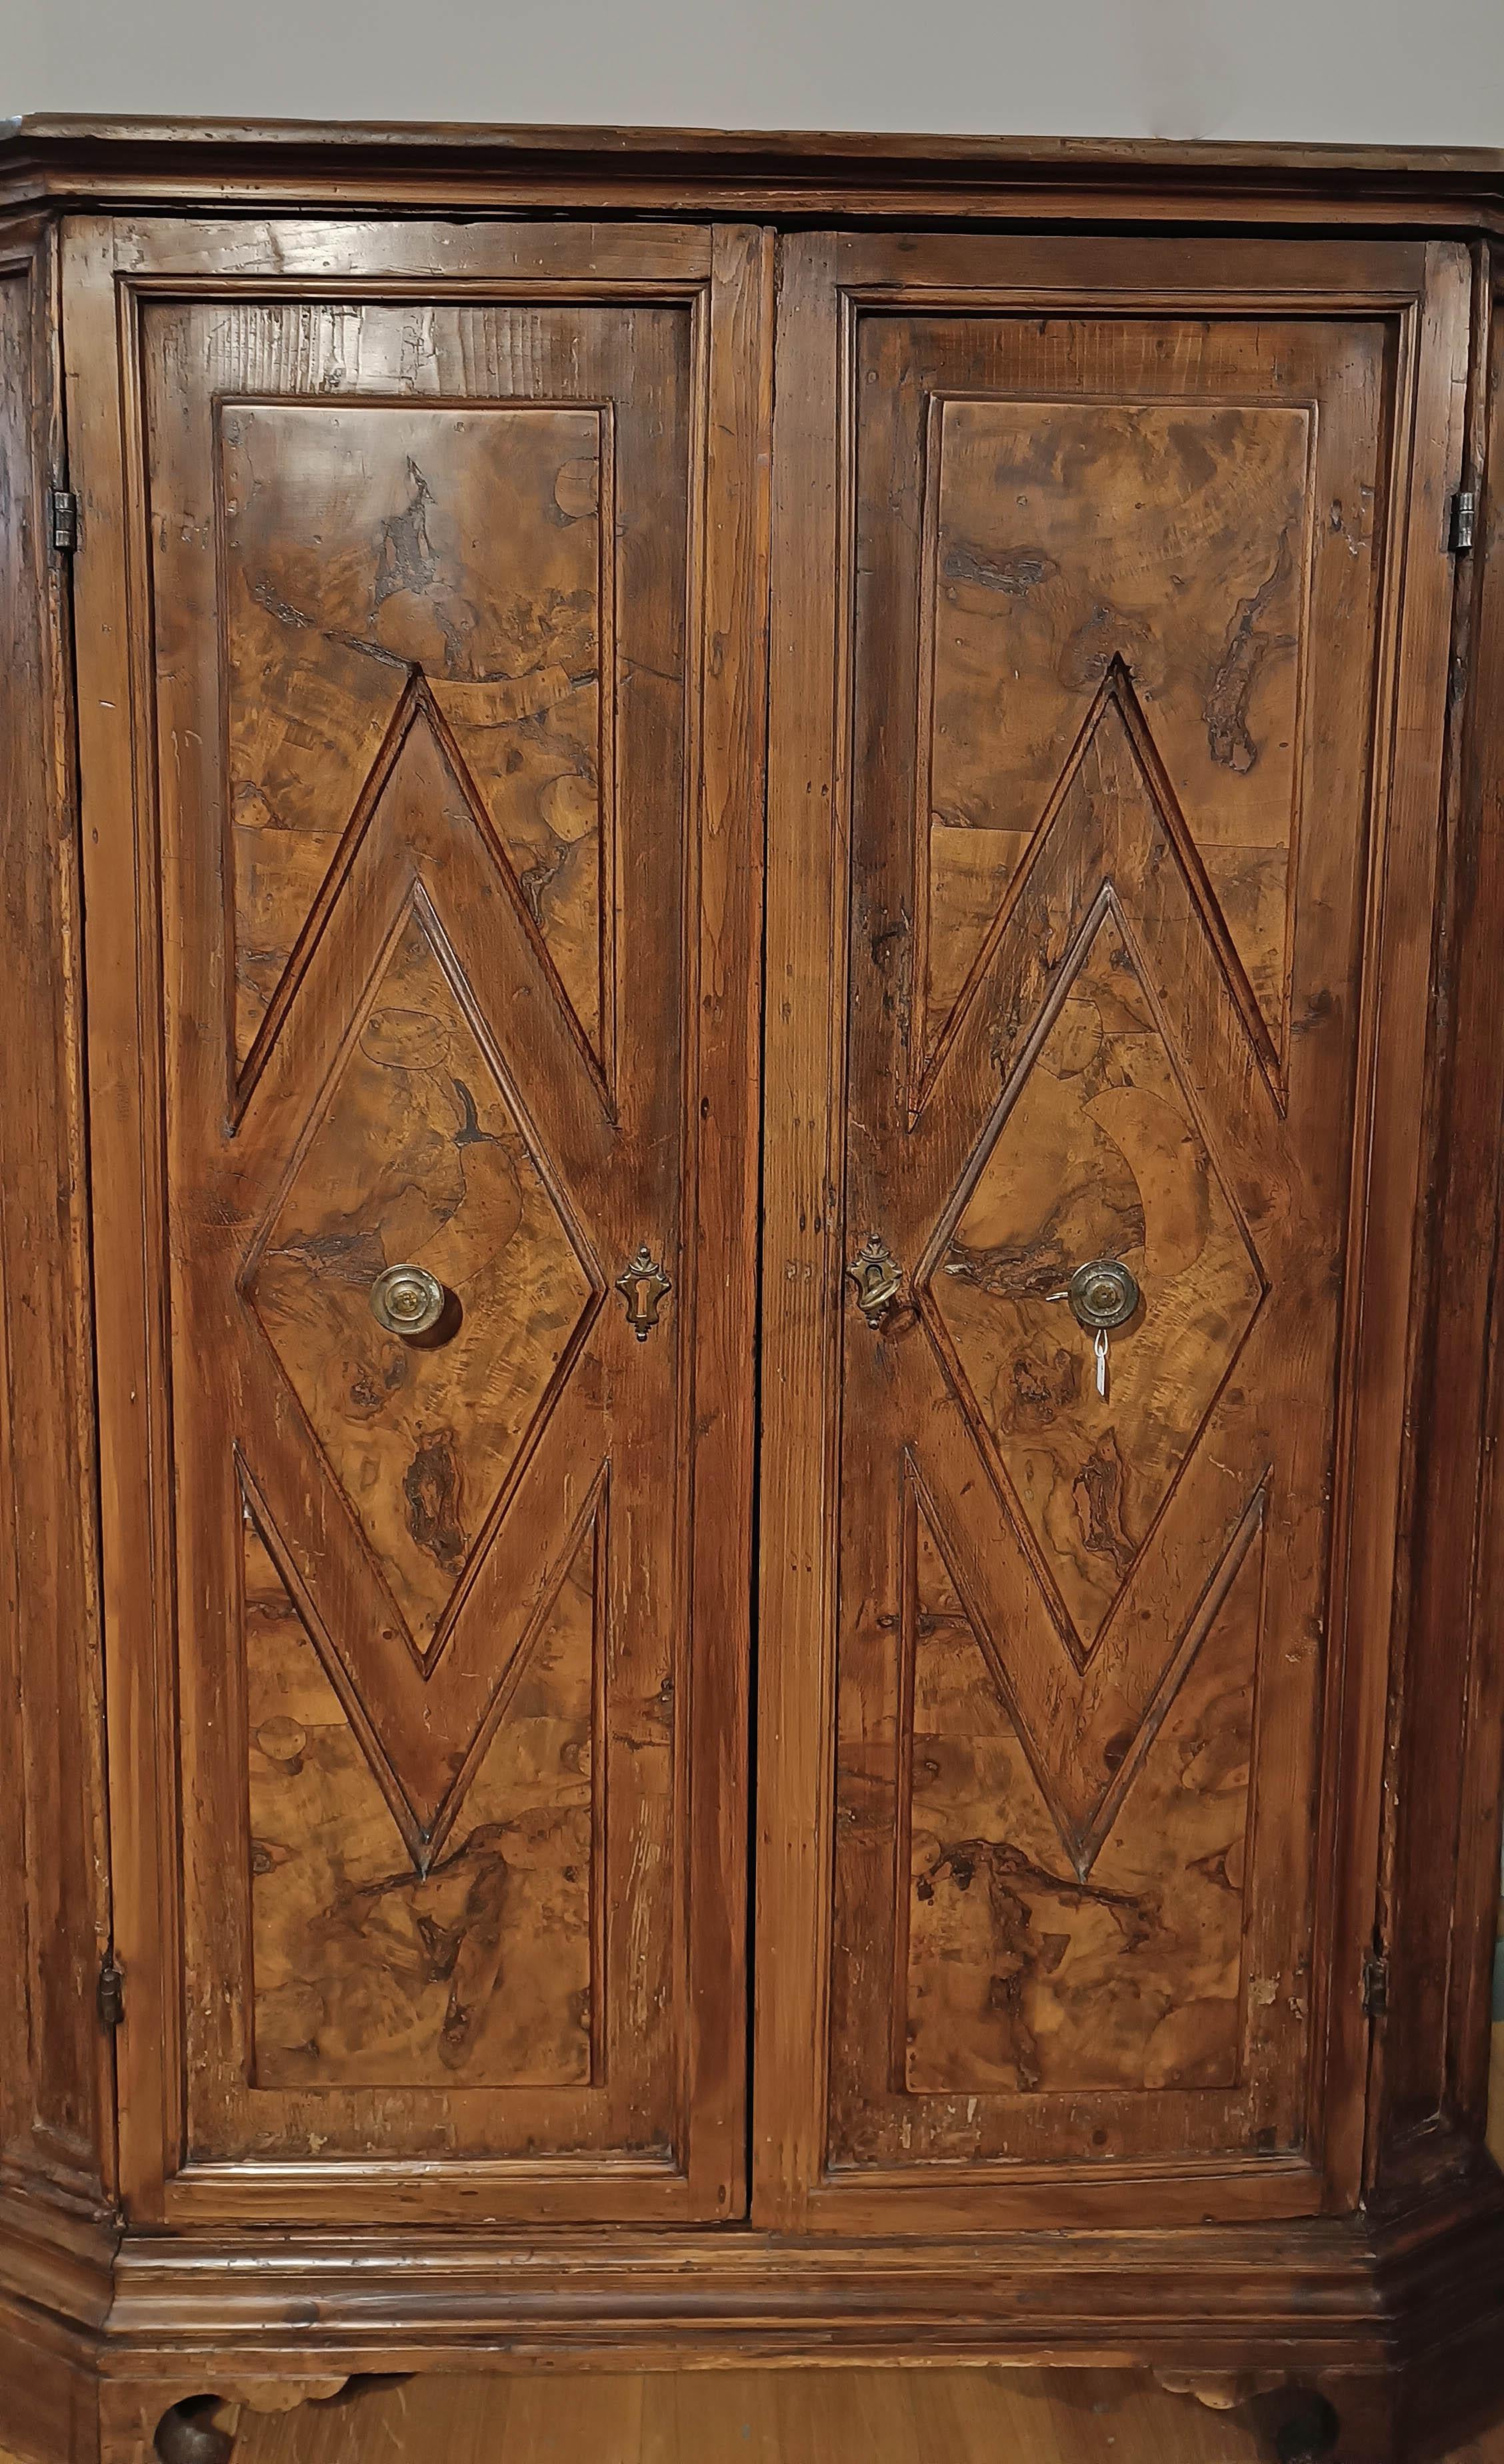 SECOND HALF OF THE 18th CENTURY WALNUT BRIAR CABINET  For Sale 1